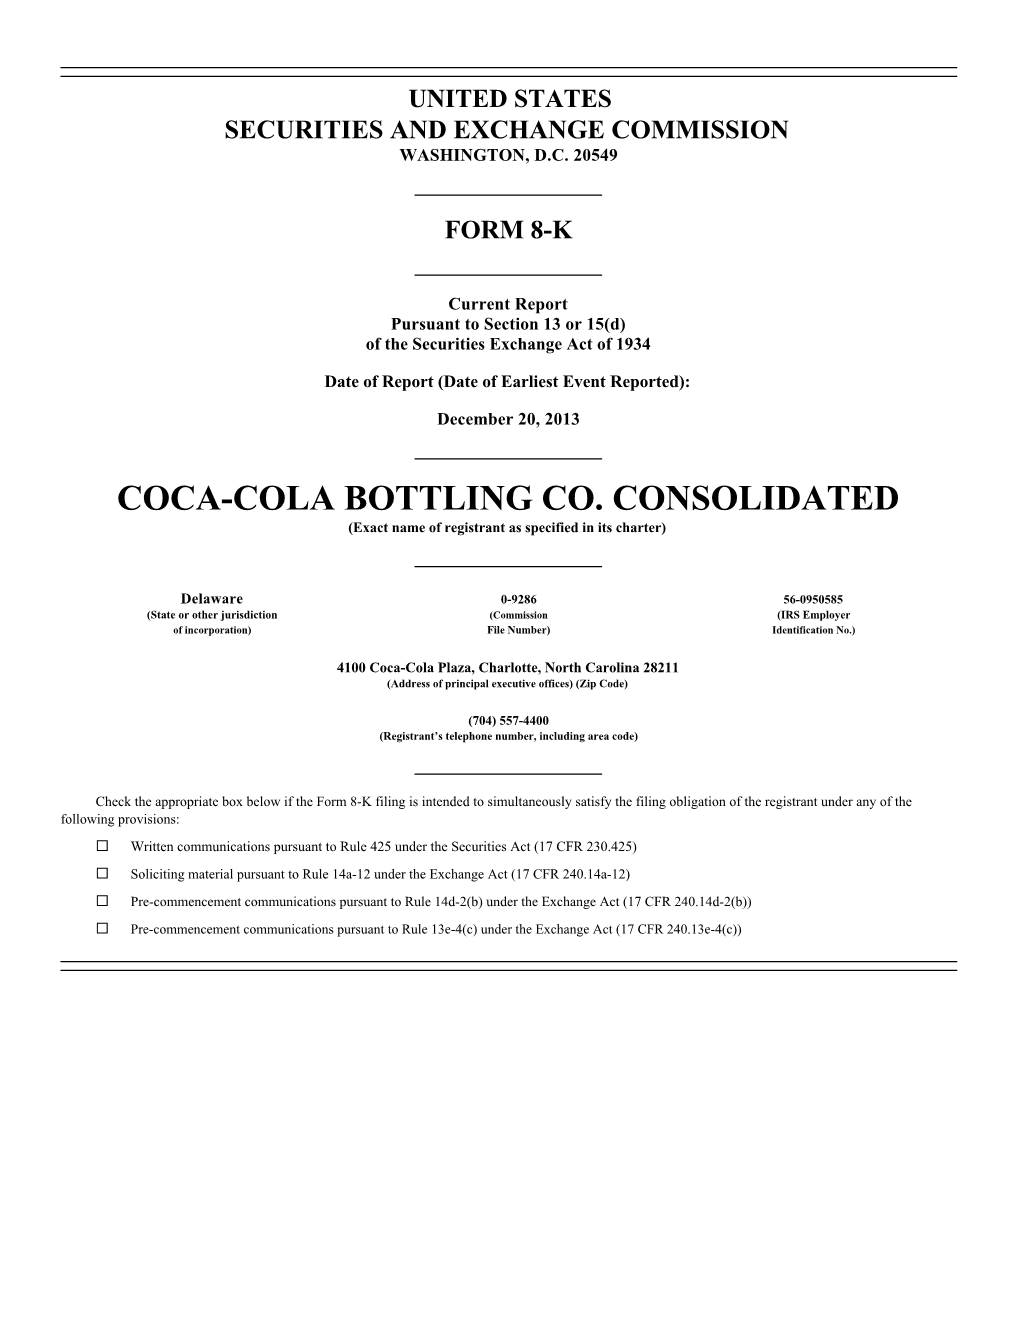 COCA-COLA BOTTLING CO. CONSOLIDATED (Exact Name of Registrant As Specified in Its Charter)